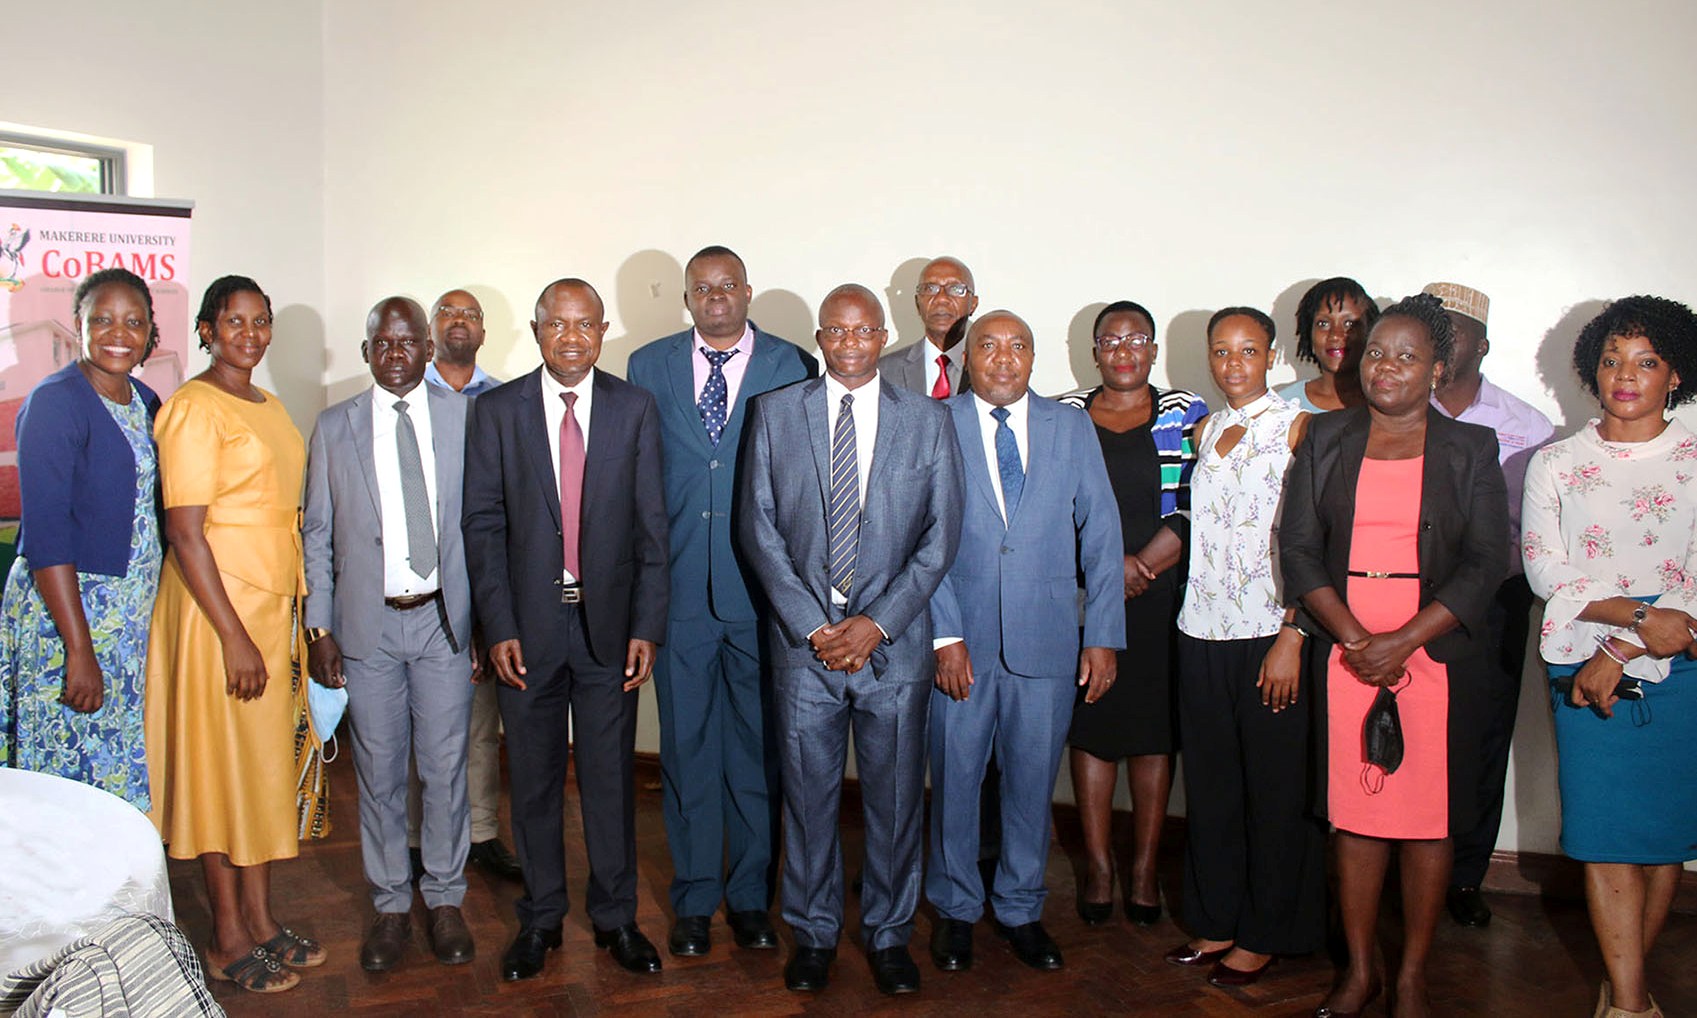 Mr. Fred Ngabirano, Commissioner, Children and Youth Affairs, Ministry of Gender, Labour and Social Development (9th L) with Principal CoBAMS-Prof. Eria Hisali (5th L), Dean SSP-Dr. James Wokadala (7th L), Ag. Head DPS & PI-Dr. Stephen O. Wandera and other participants at the dissemination on 10th March 2022.